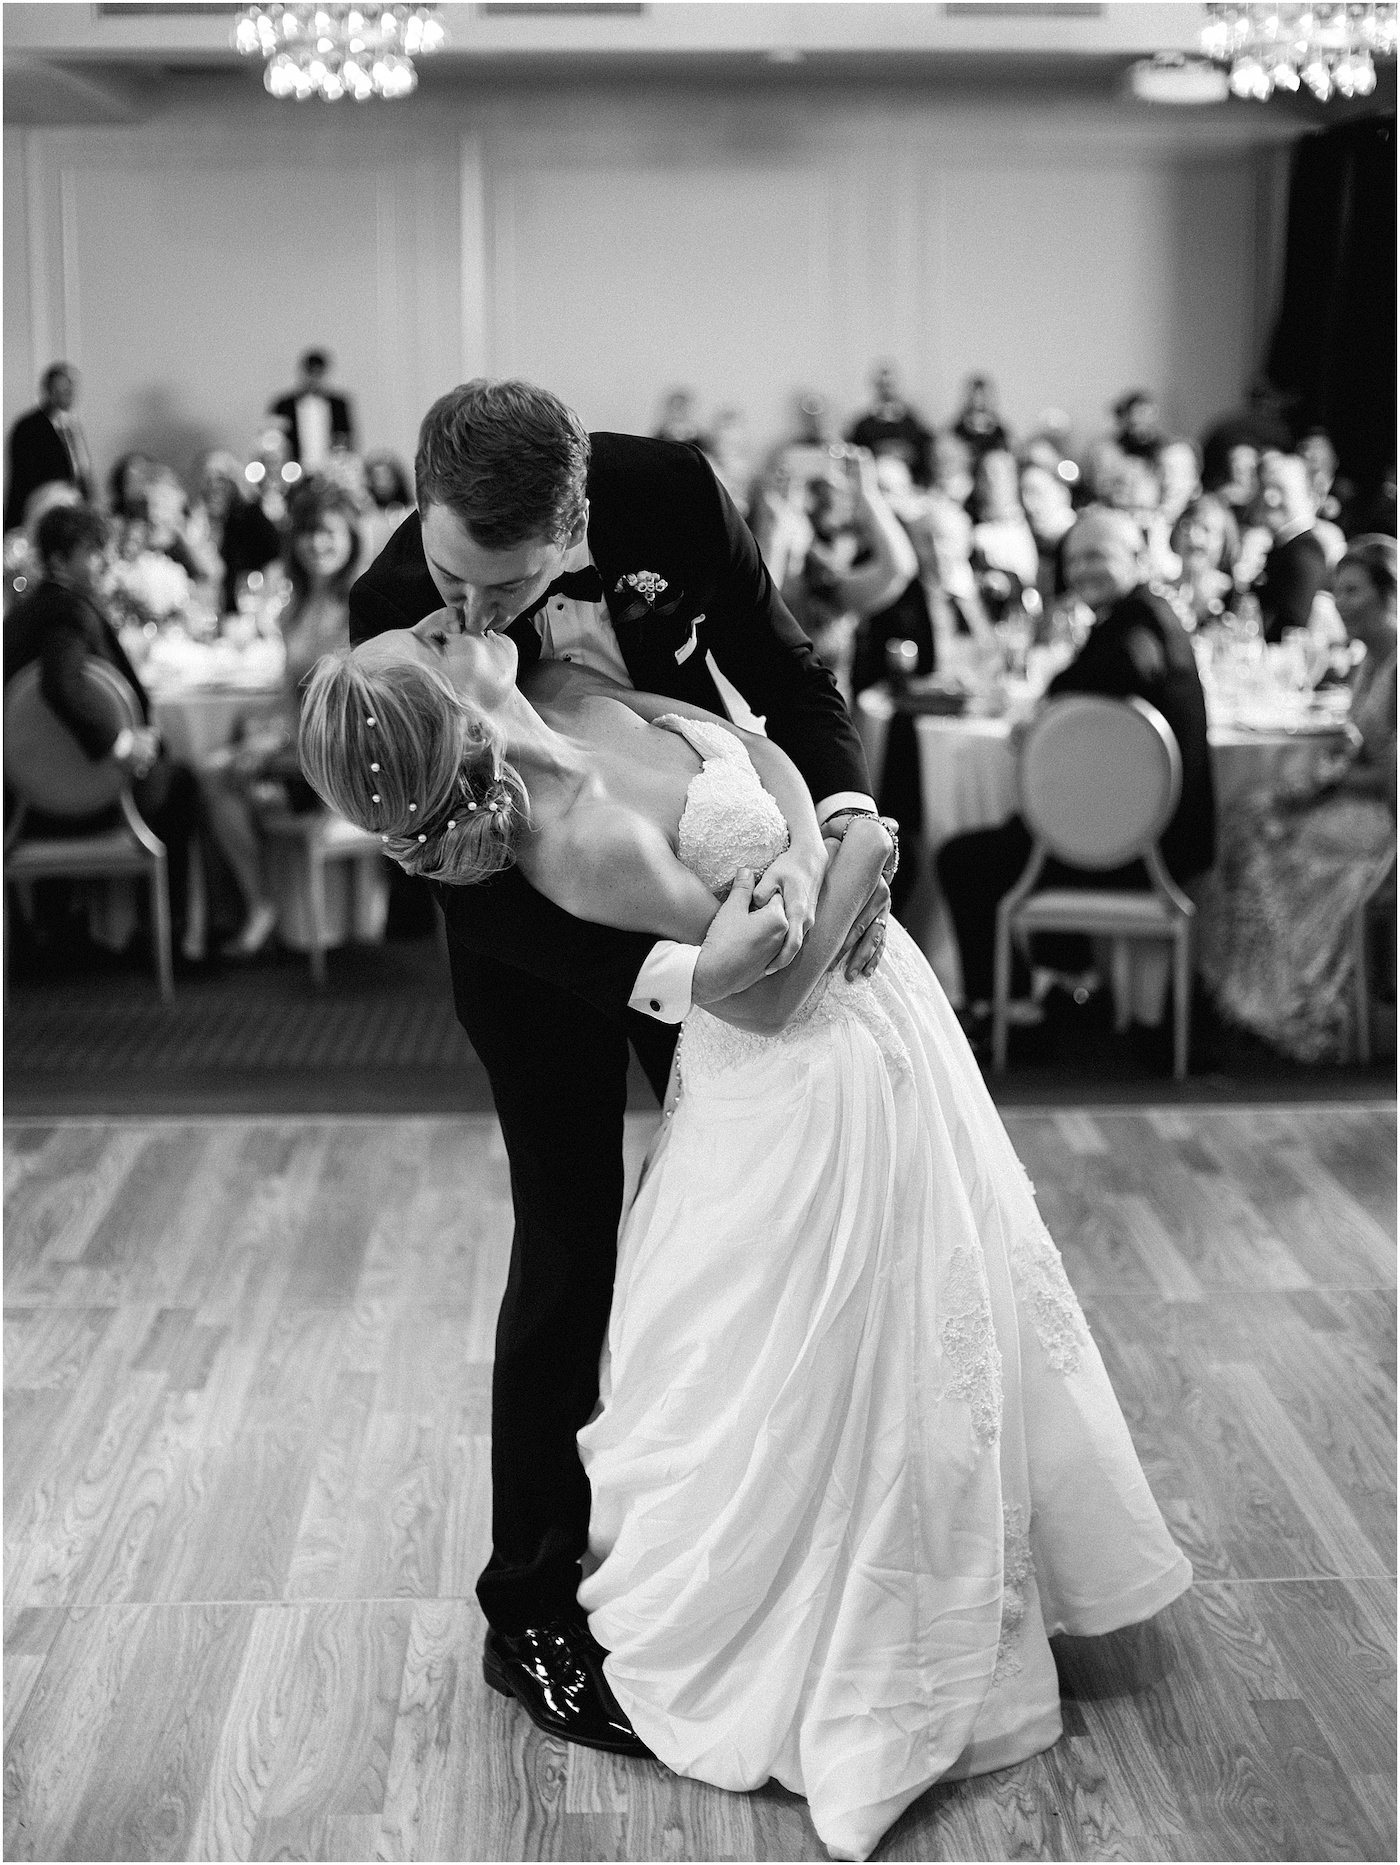 Bride and Groom First Dance Photo | Black and White Photography Wedding Portrait